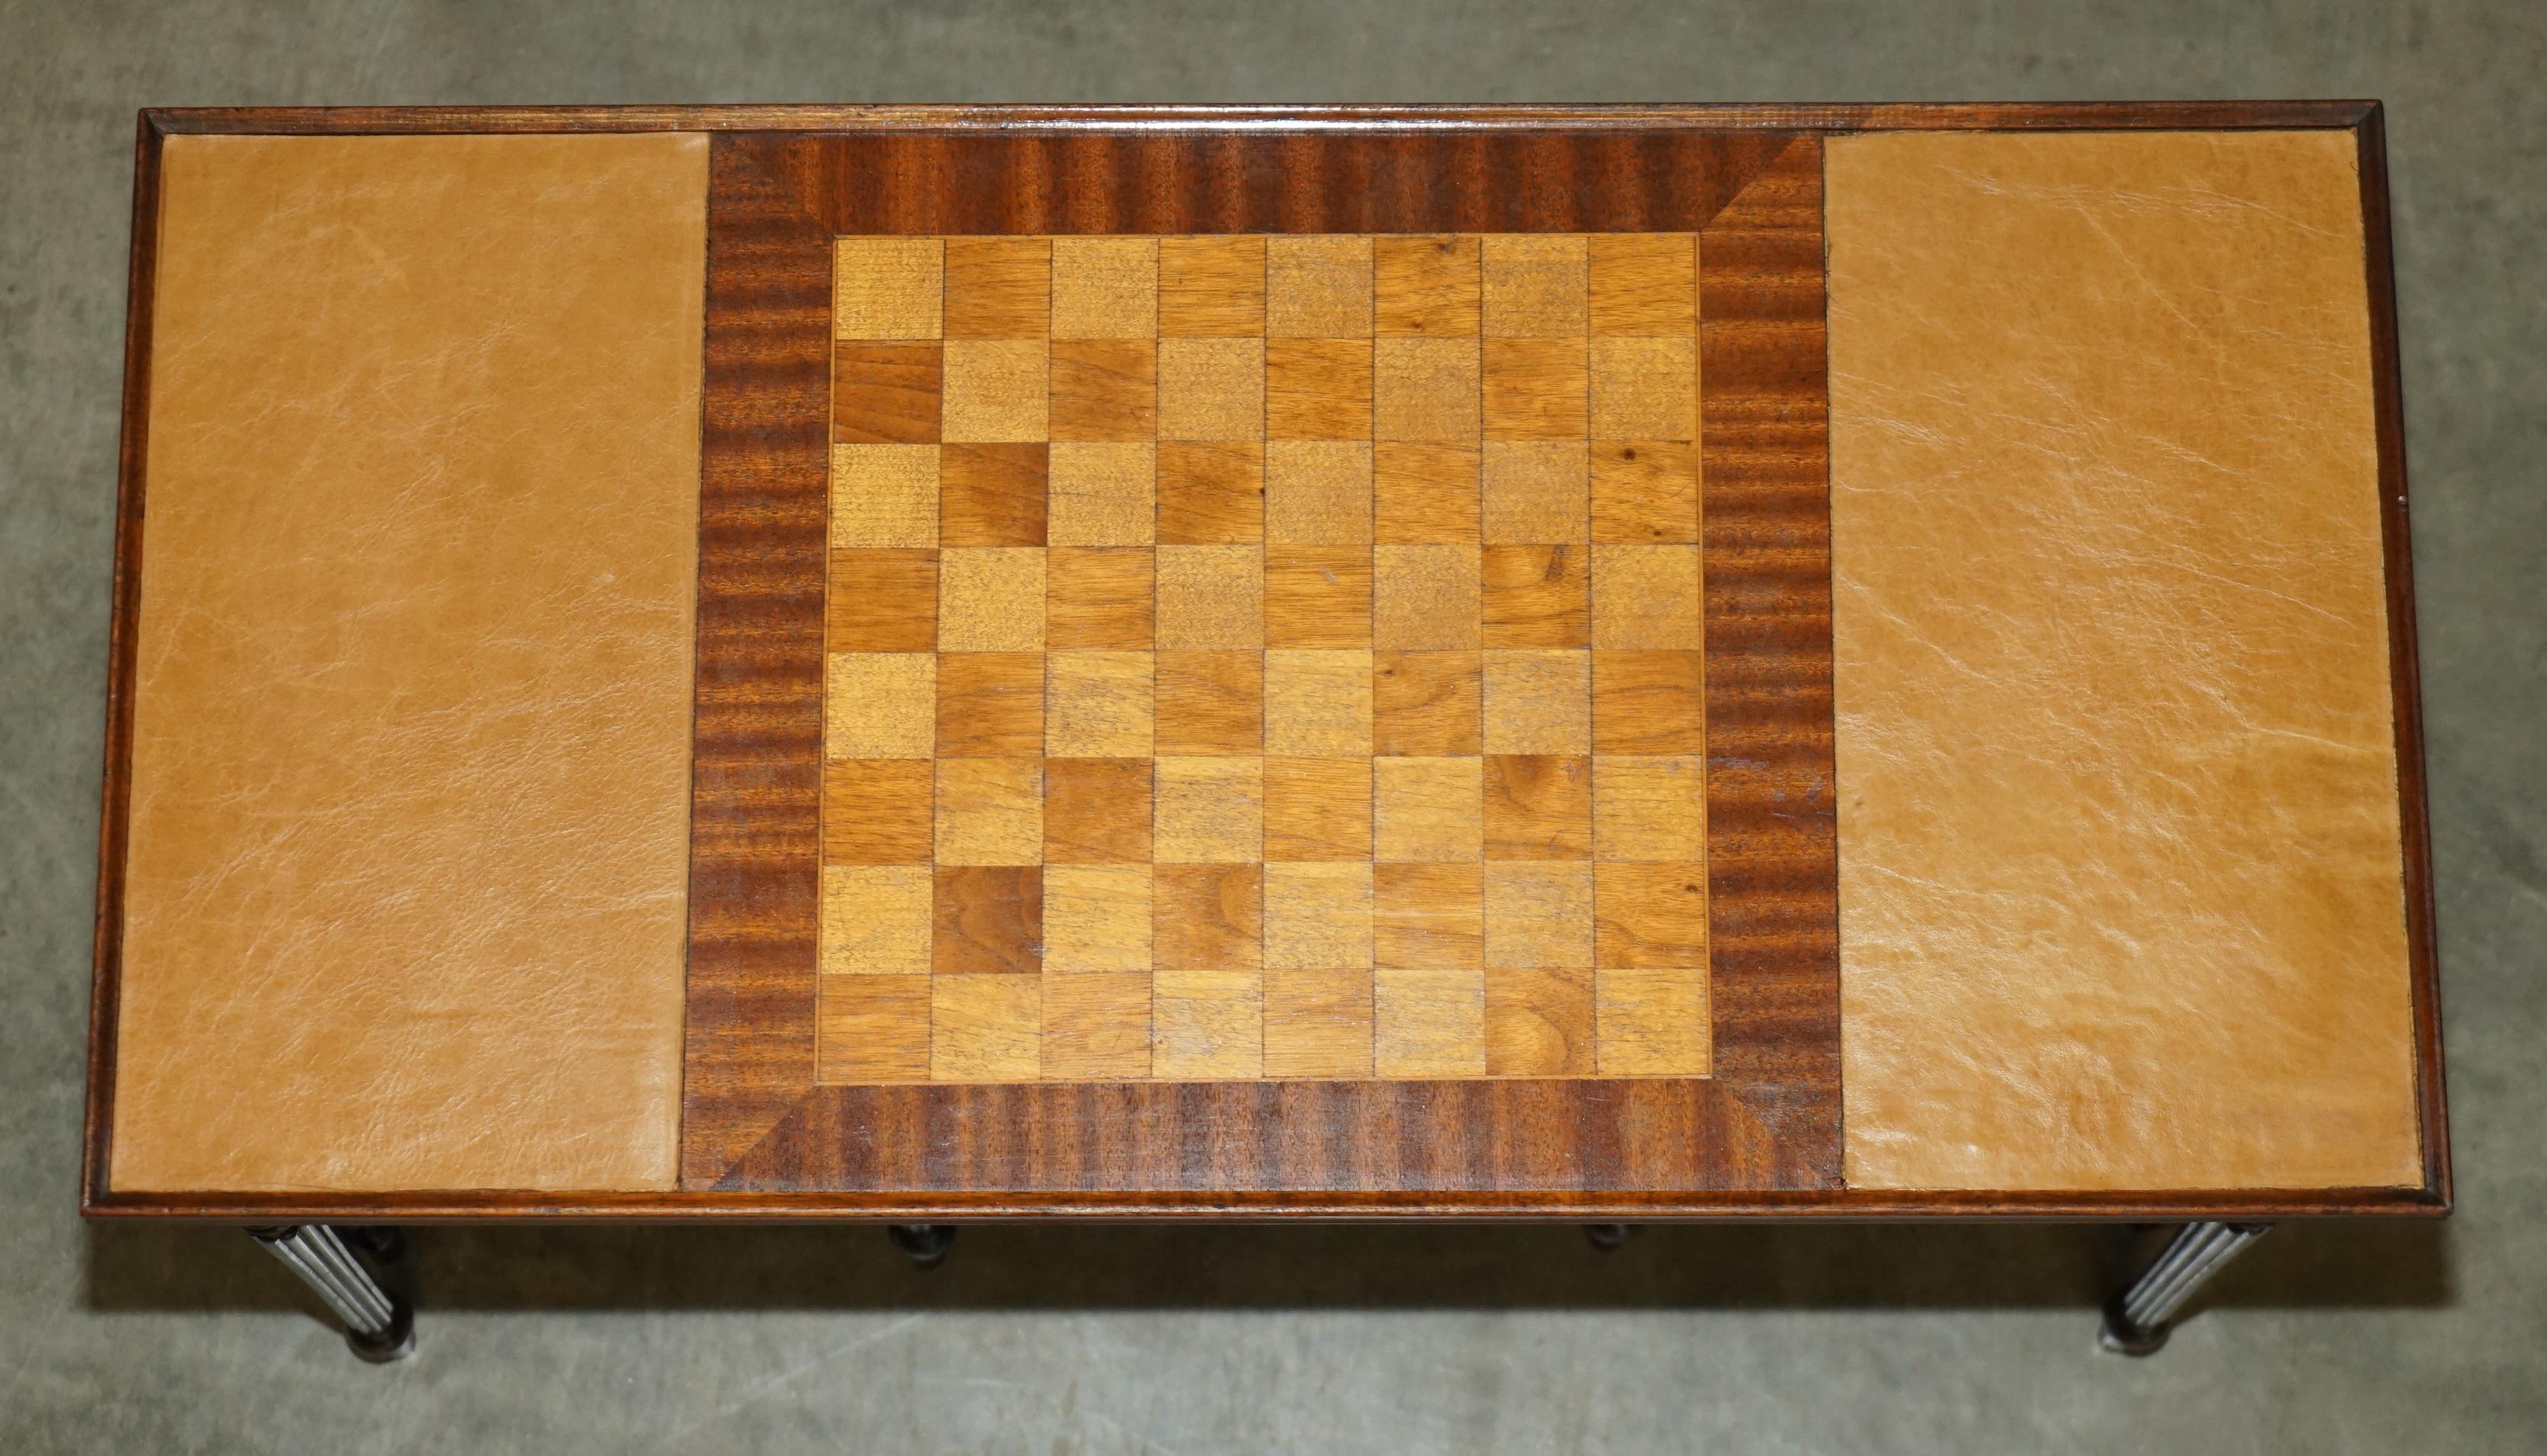 Hand-Crafted VINTAGE CIRCA 1950's LEATHER TOPPED CHESSBOARD COFFEE NEST OF TABLES FOR CHESS! For Sale